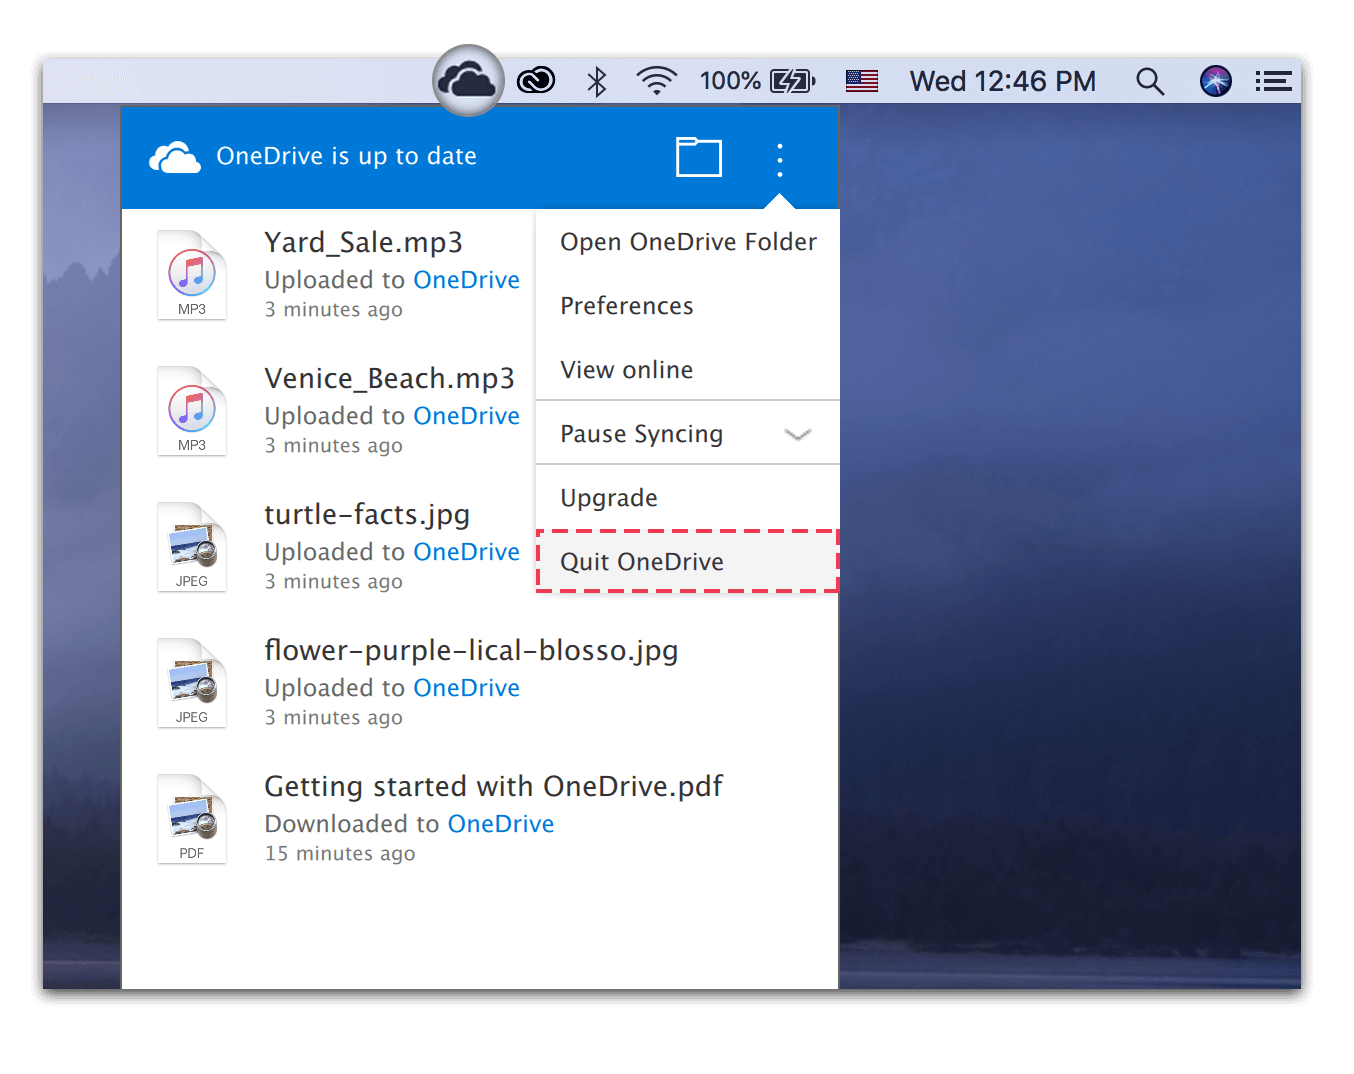 reconfigure onedrive for business mac